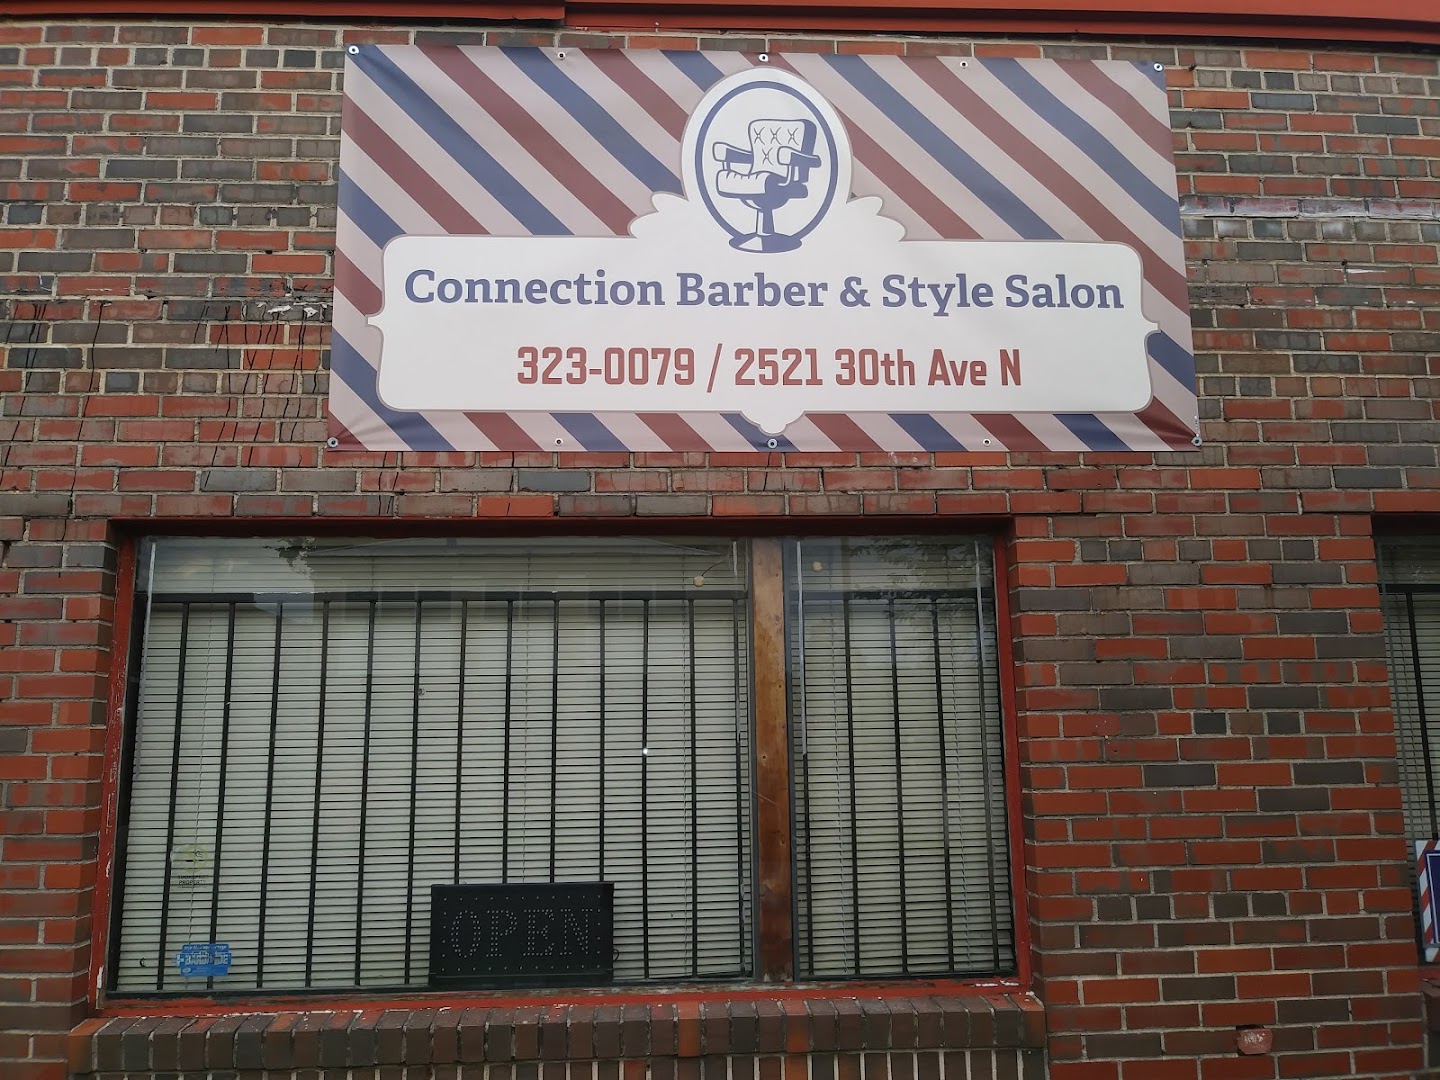 Connection Barber & Style Salon "Cookie" & "Jerald" & "Malcolm"